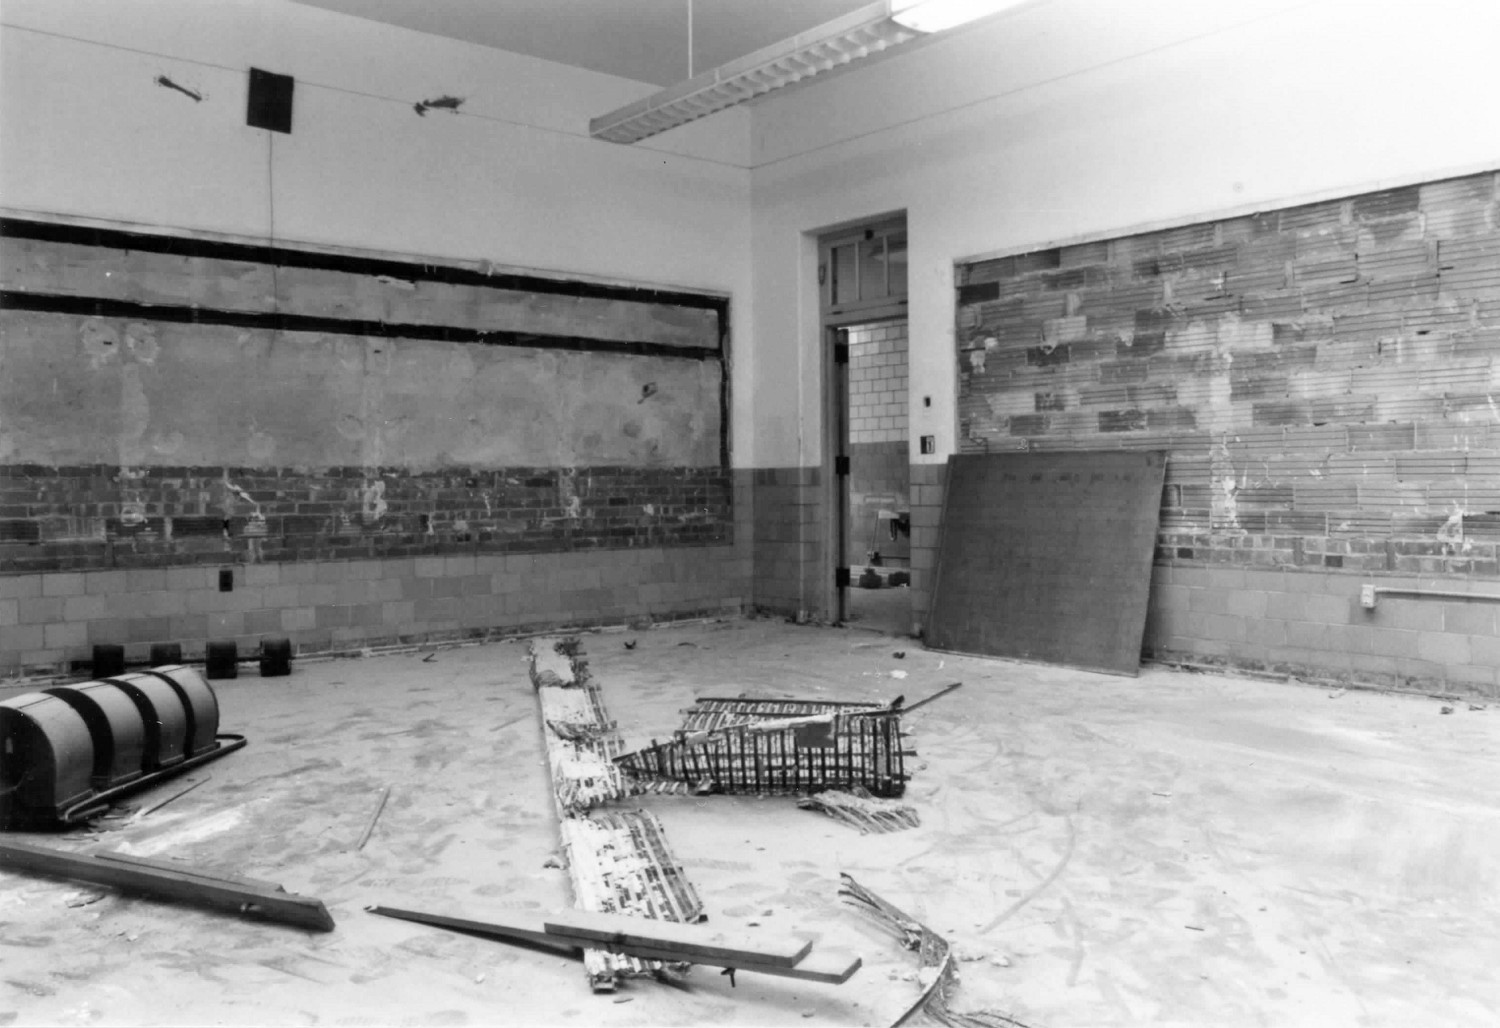 McKinley School - North Side School, Columbus Indiana Typical Classroom, 1942 section of building (1987)